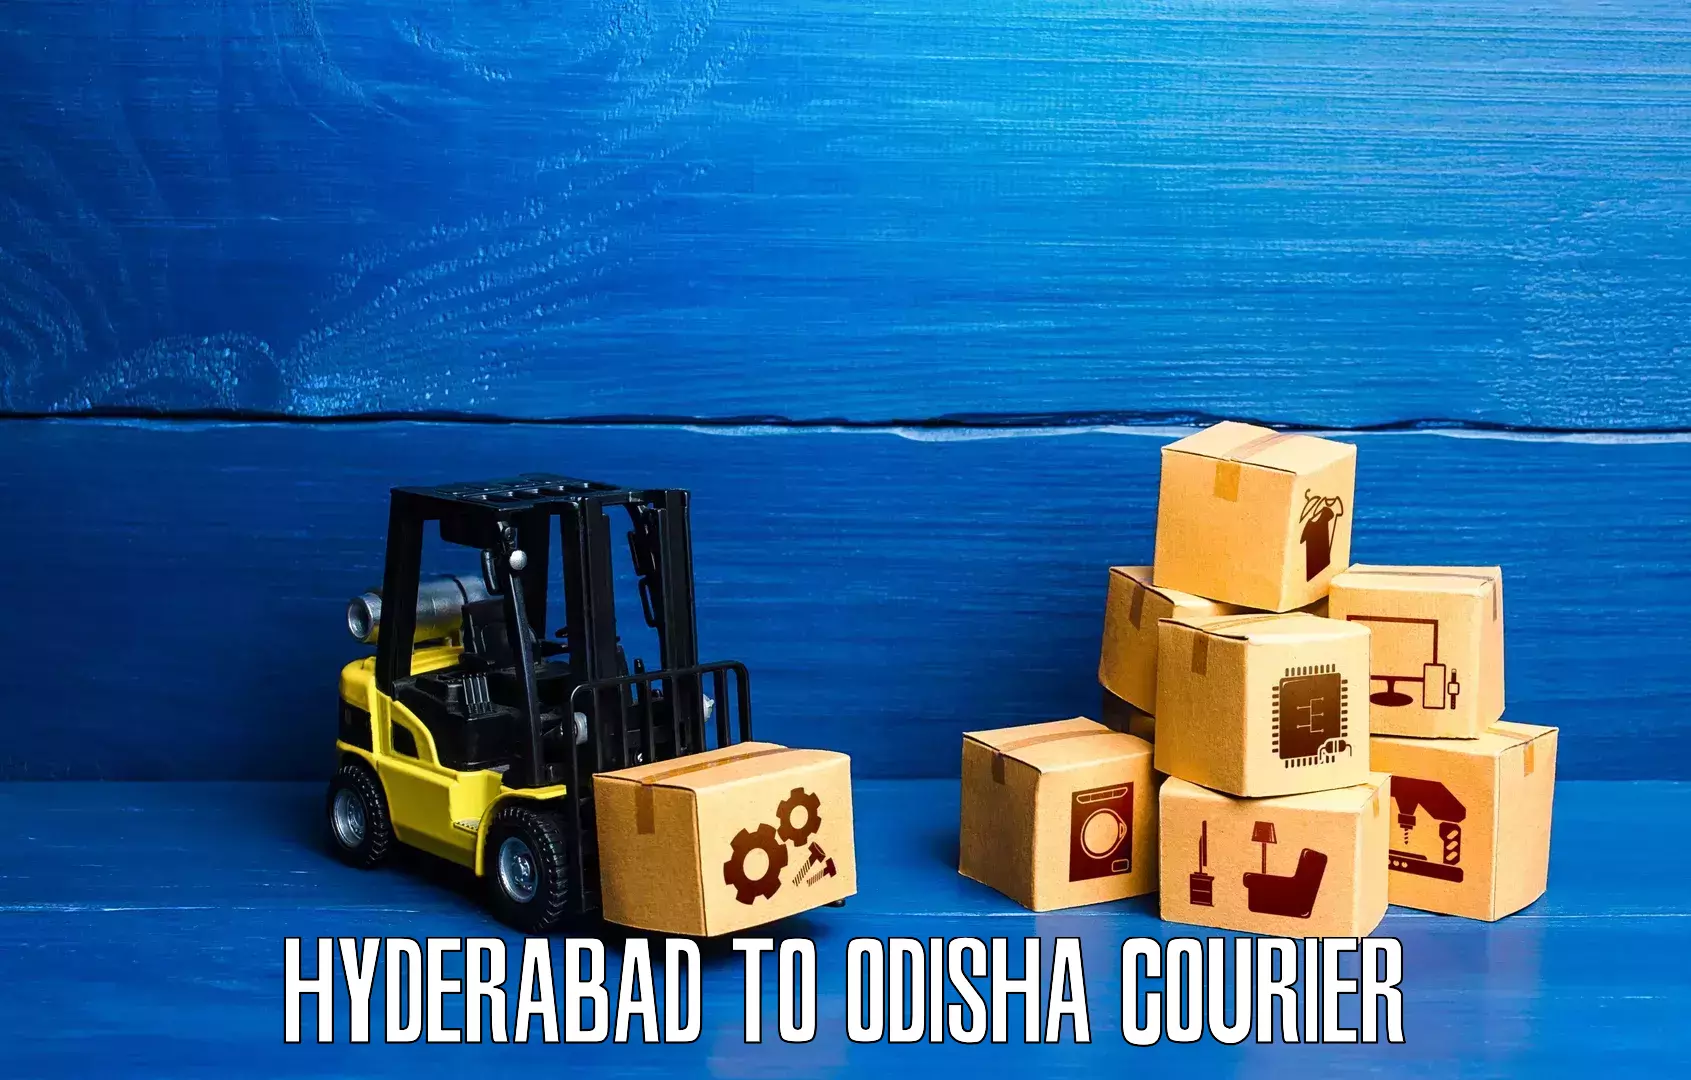 Courier service efficiency Hyderabad to Odisha